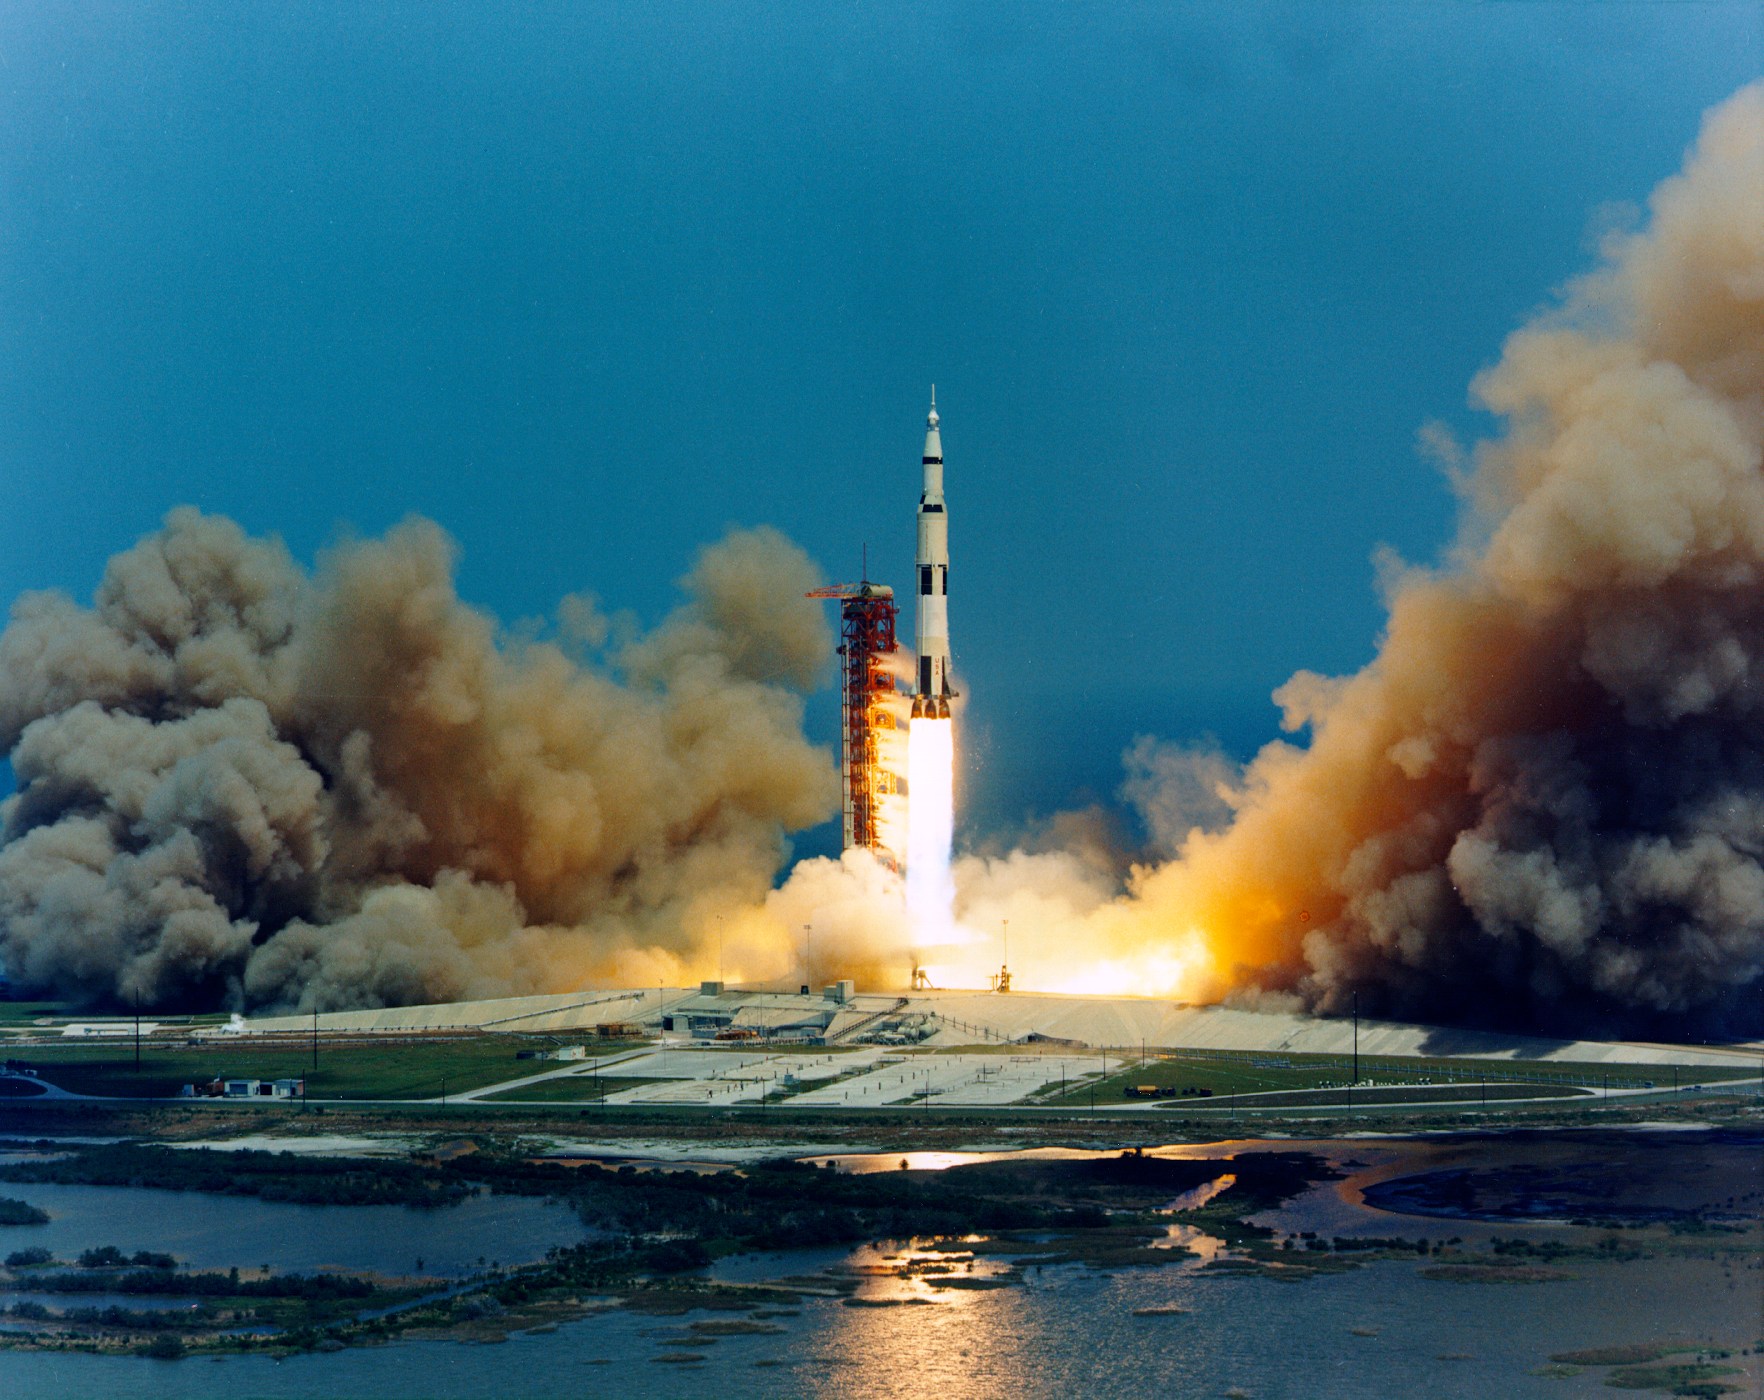 This photograph shows the lift-off of Apollo 16 on April 16, 1972. The crew was launched into space atop a Saturn V rocket, designated as AS-511. NASA.